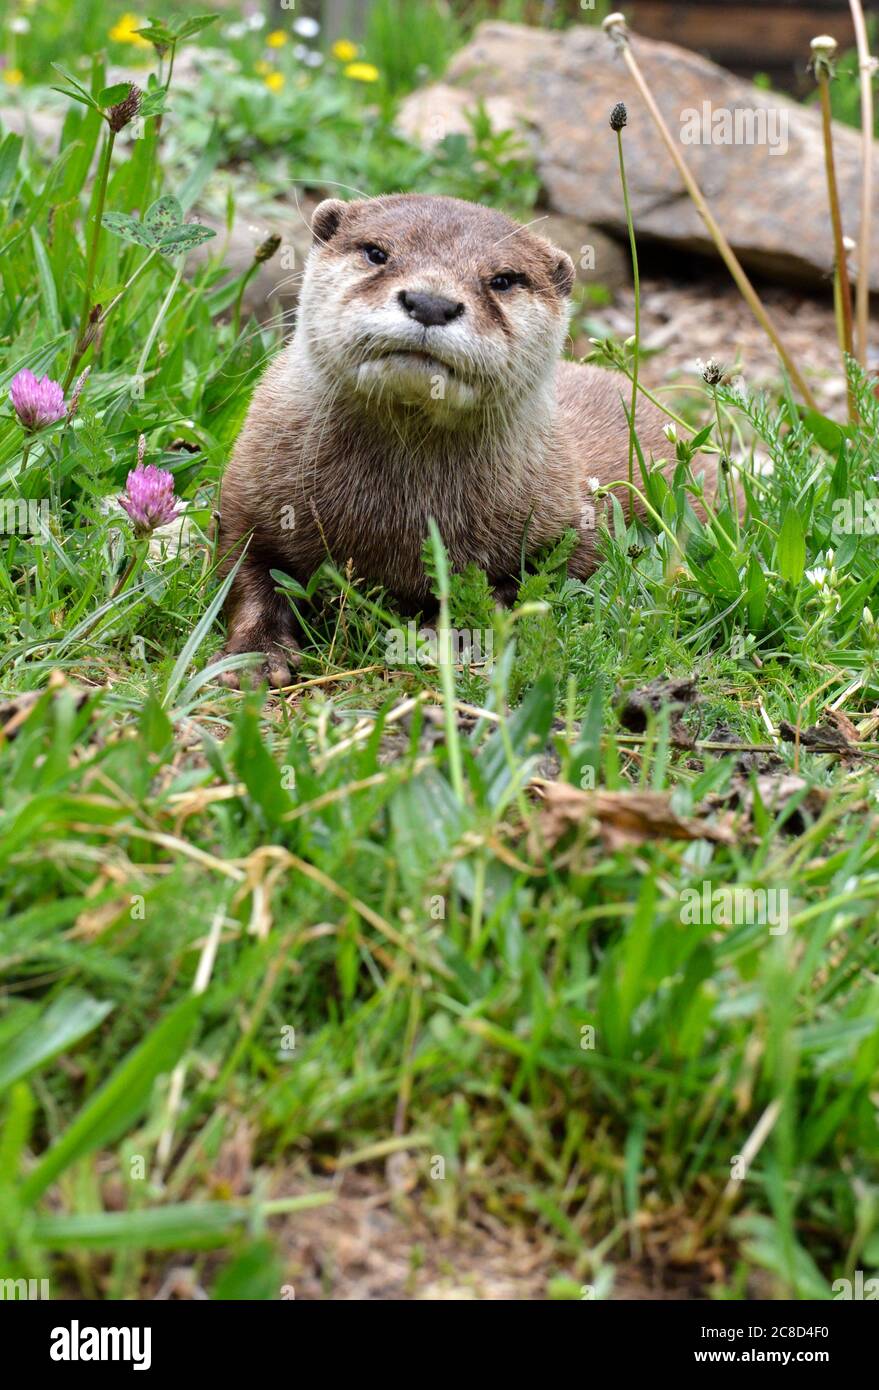 A beautiful and cute otter on the banks of a river. This is aquatic animal. Stock Photo